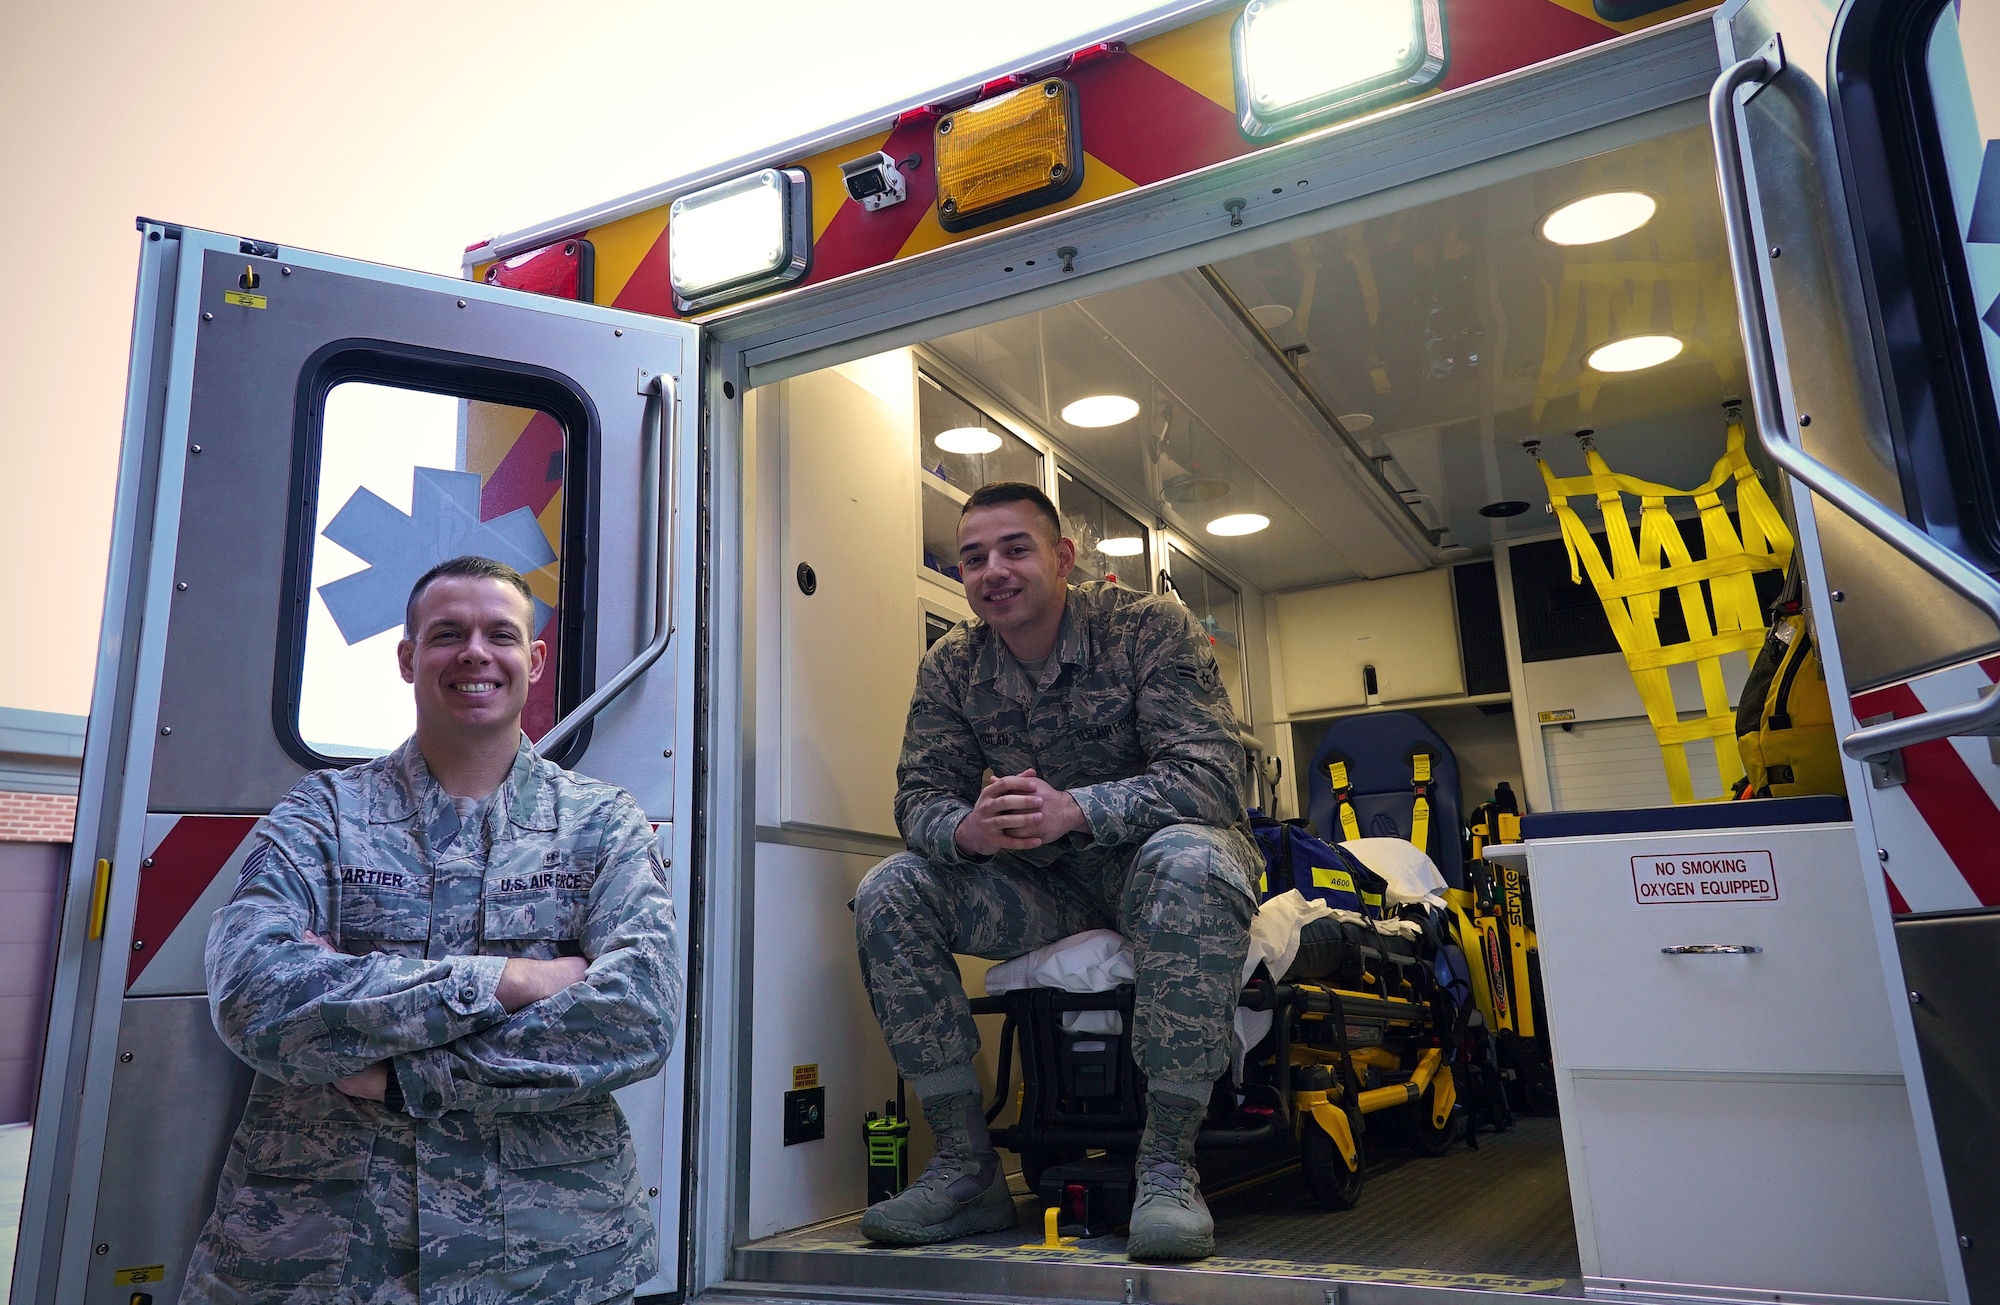 Ambulance service technicians with the 319th Medical Group, Staff Sgt. Jocelin Cartier, left, and Airman 1st Class Michael Nolan, pose for a photo on National First Responders Day, Oct. 28, 2019, on Grand Forks Air Force Base, North Dakota. Cartier and Nolan have served a collective six years in the Air Force, and say they enjoy being able to help people when needed. (U.S Air Force photo illustration by Senior Airman Elora J. Martinez)(This image was emphasized using color filters and vignette.)